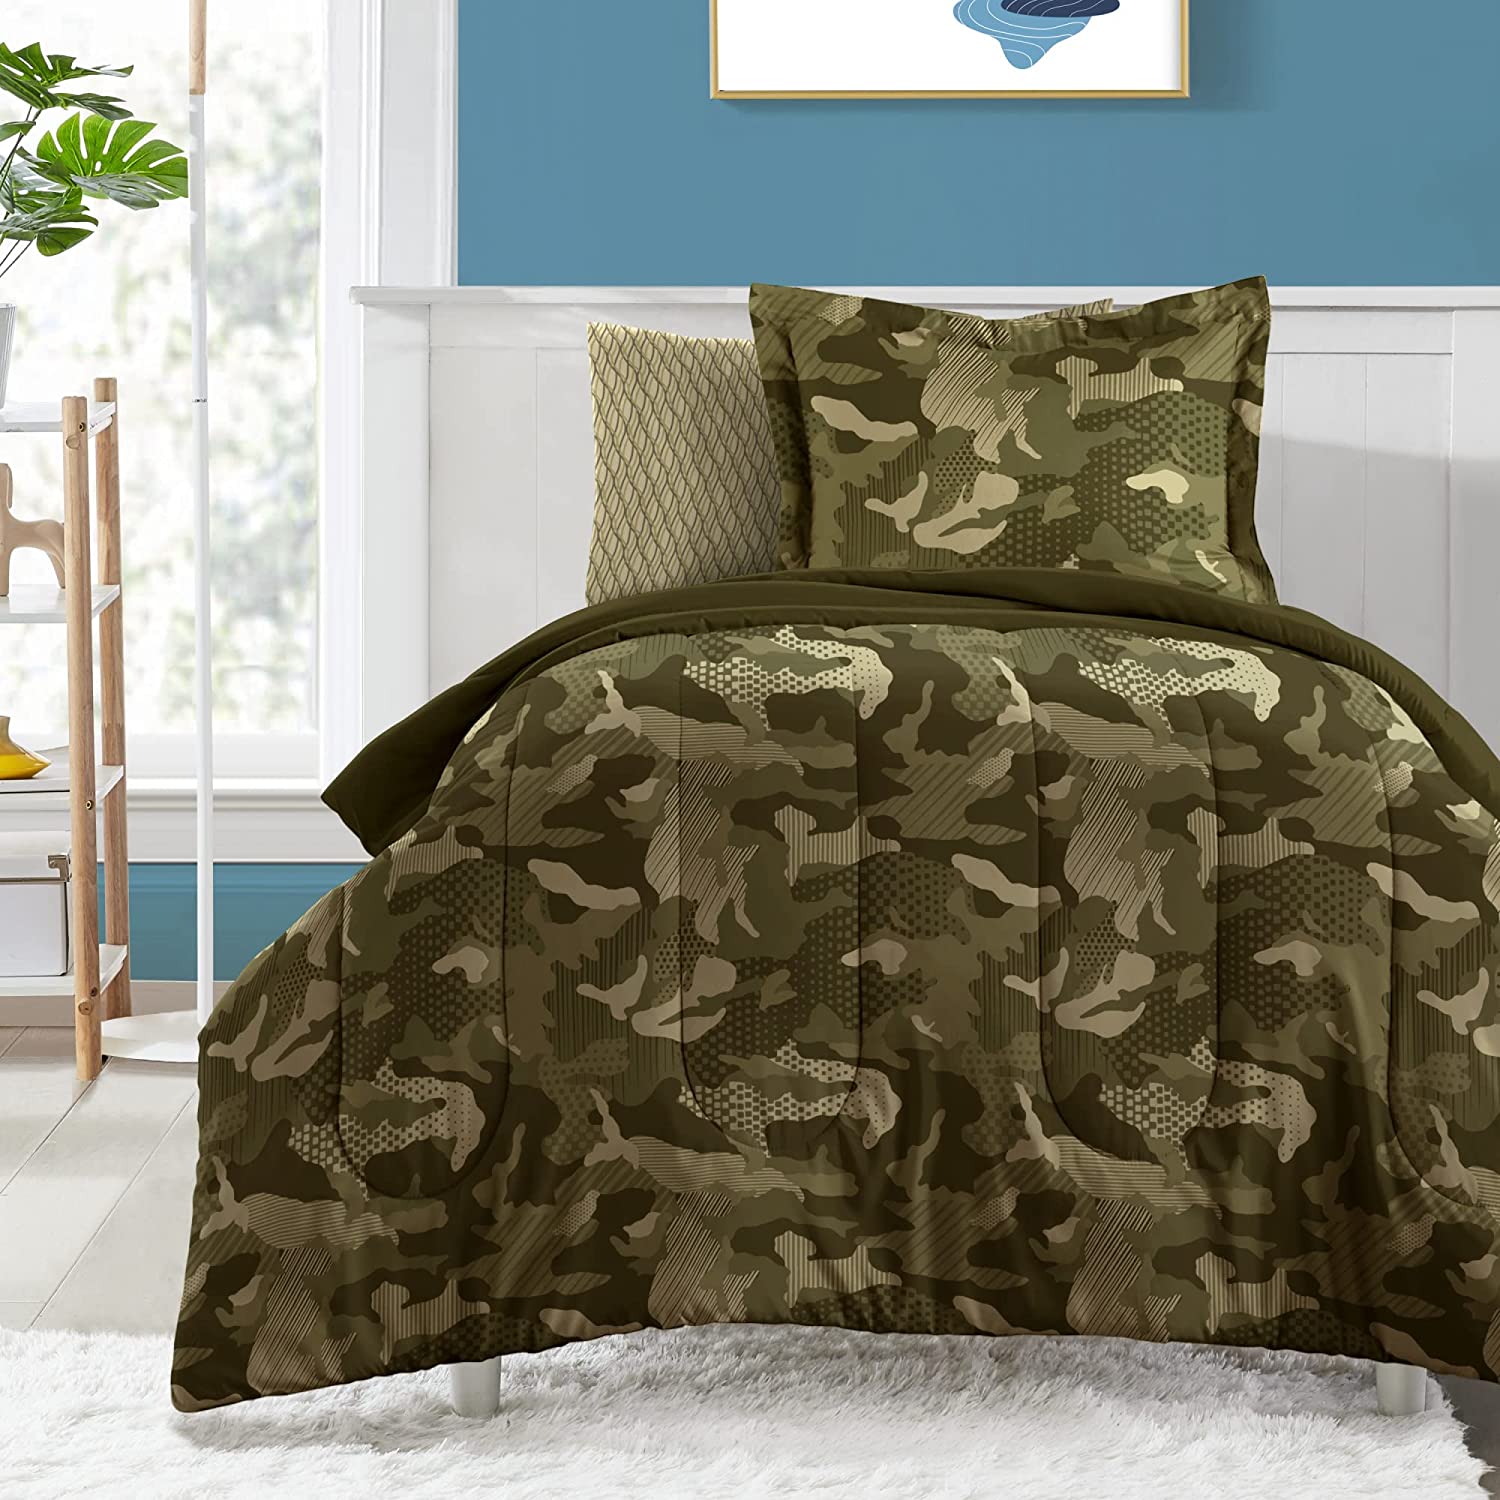 Dream Factory Geo Camo Twin 5 Piece Comforter Set, Bed-in-a-Bag, Cotton/Polyester, Camouflage, Multi, Unisex, Child - image 1 of 12